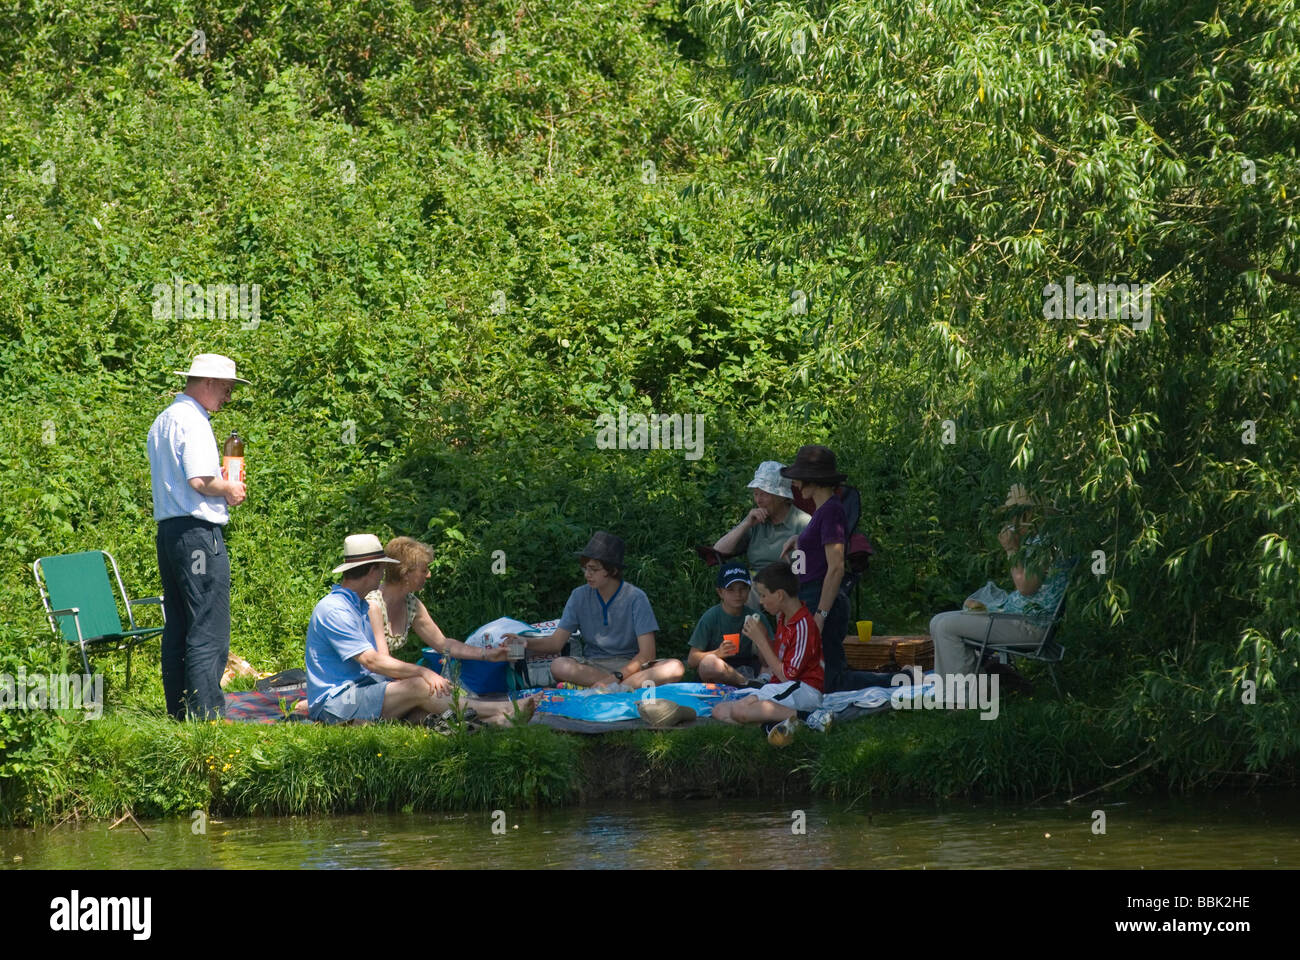 Family picnic on banks of River Thames The River Isis in Oxford Oxfordshire  2000s, 2009 HOMER SYKES Stock Photo